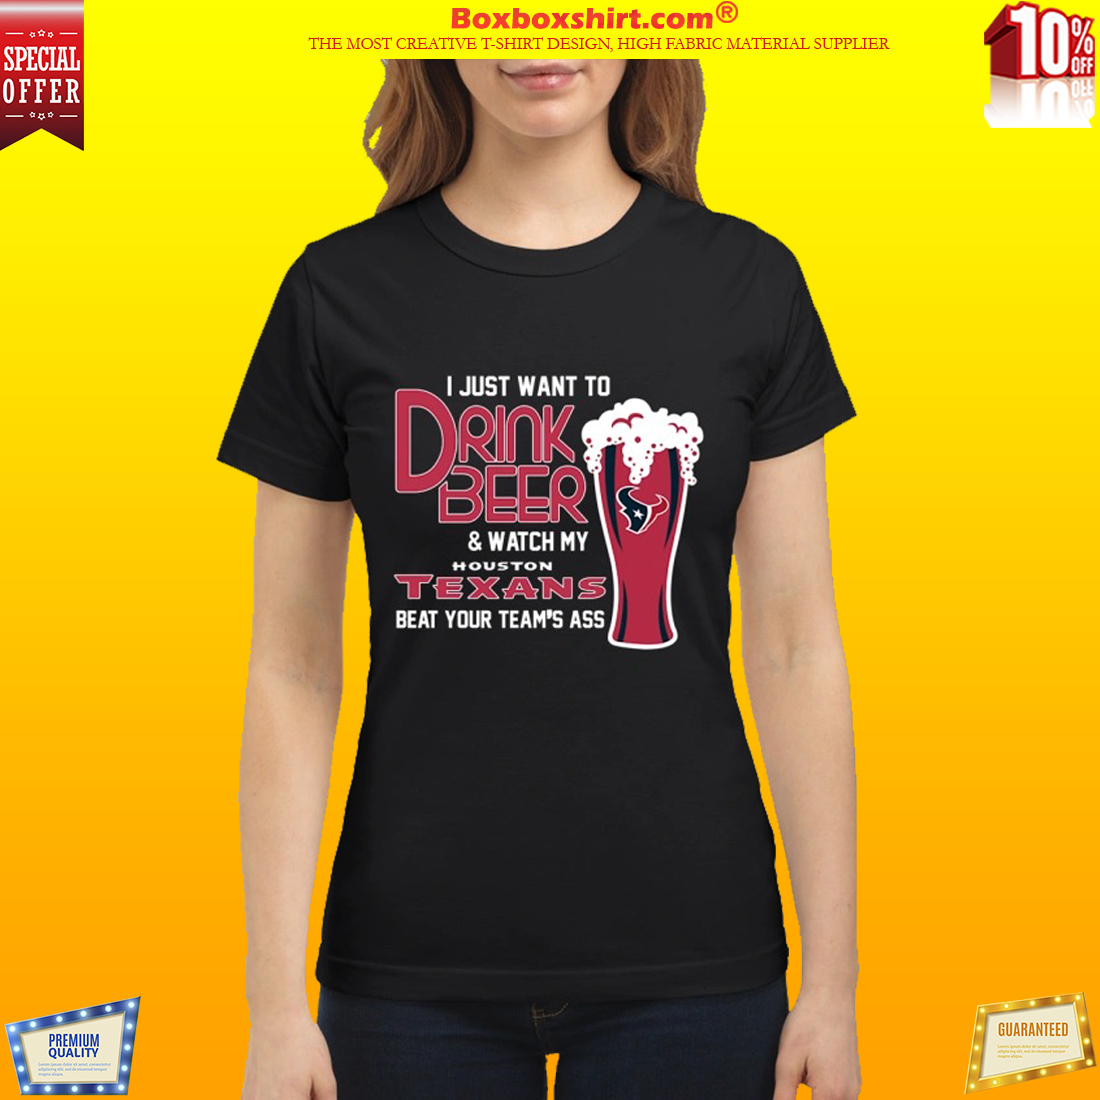 I just want to drink beer and watch my Houstons Texans beat your team ass classic shirt